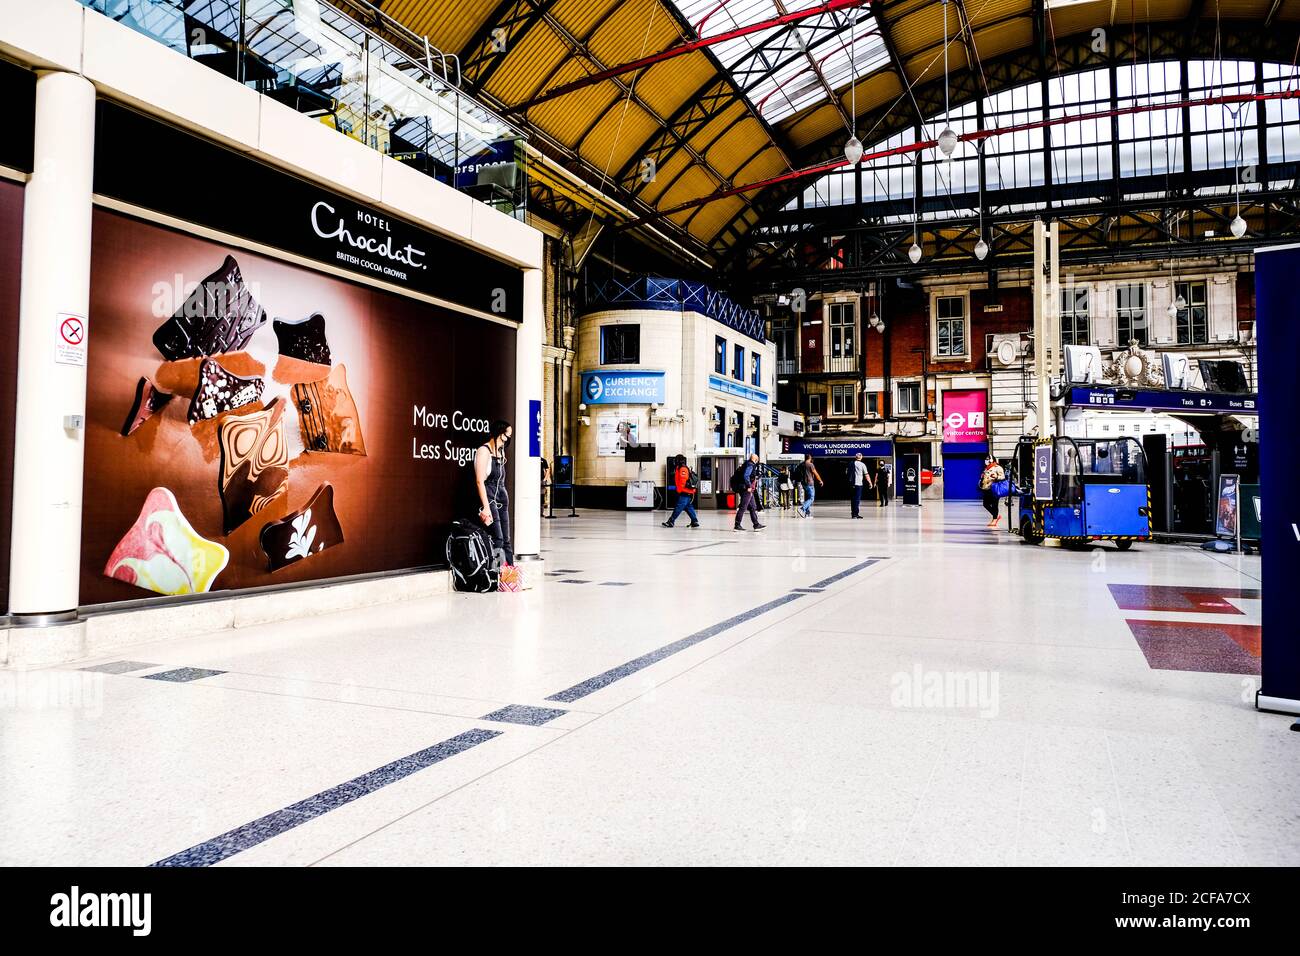 Early Morning Victoria Station, London UK, Reduced Passenger Traffic COVID-19 Summer 2020 Stock Photo